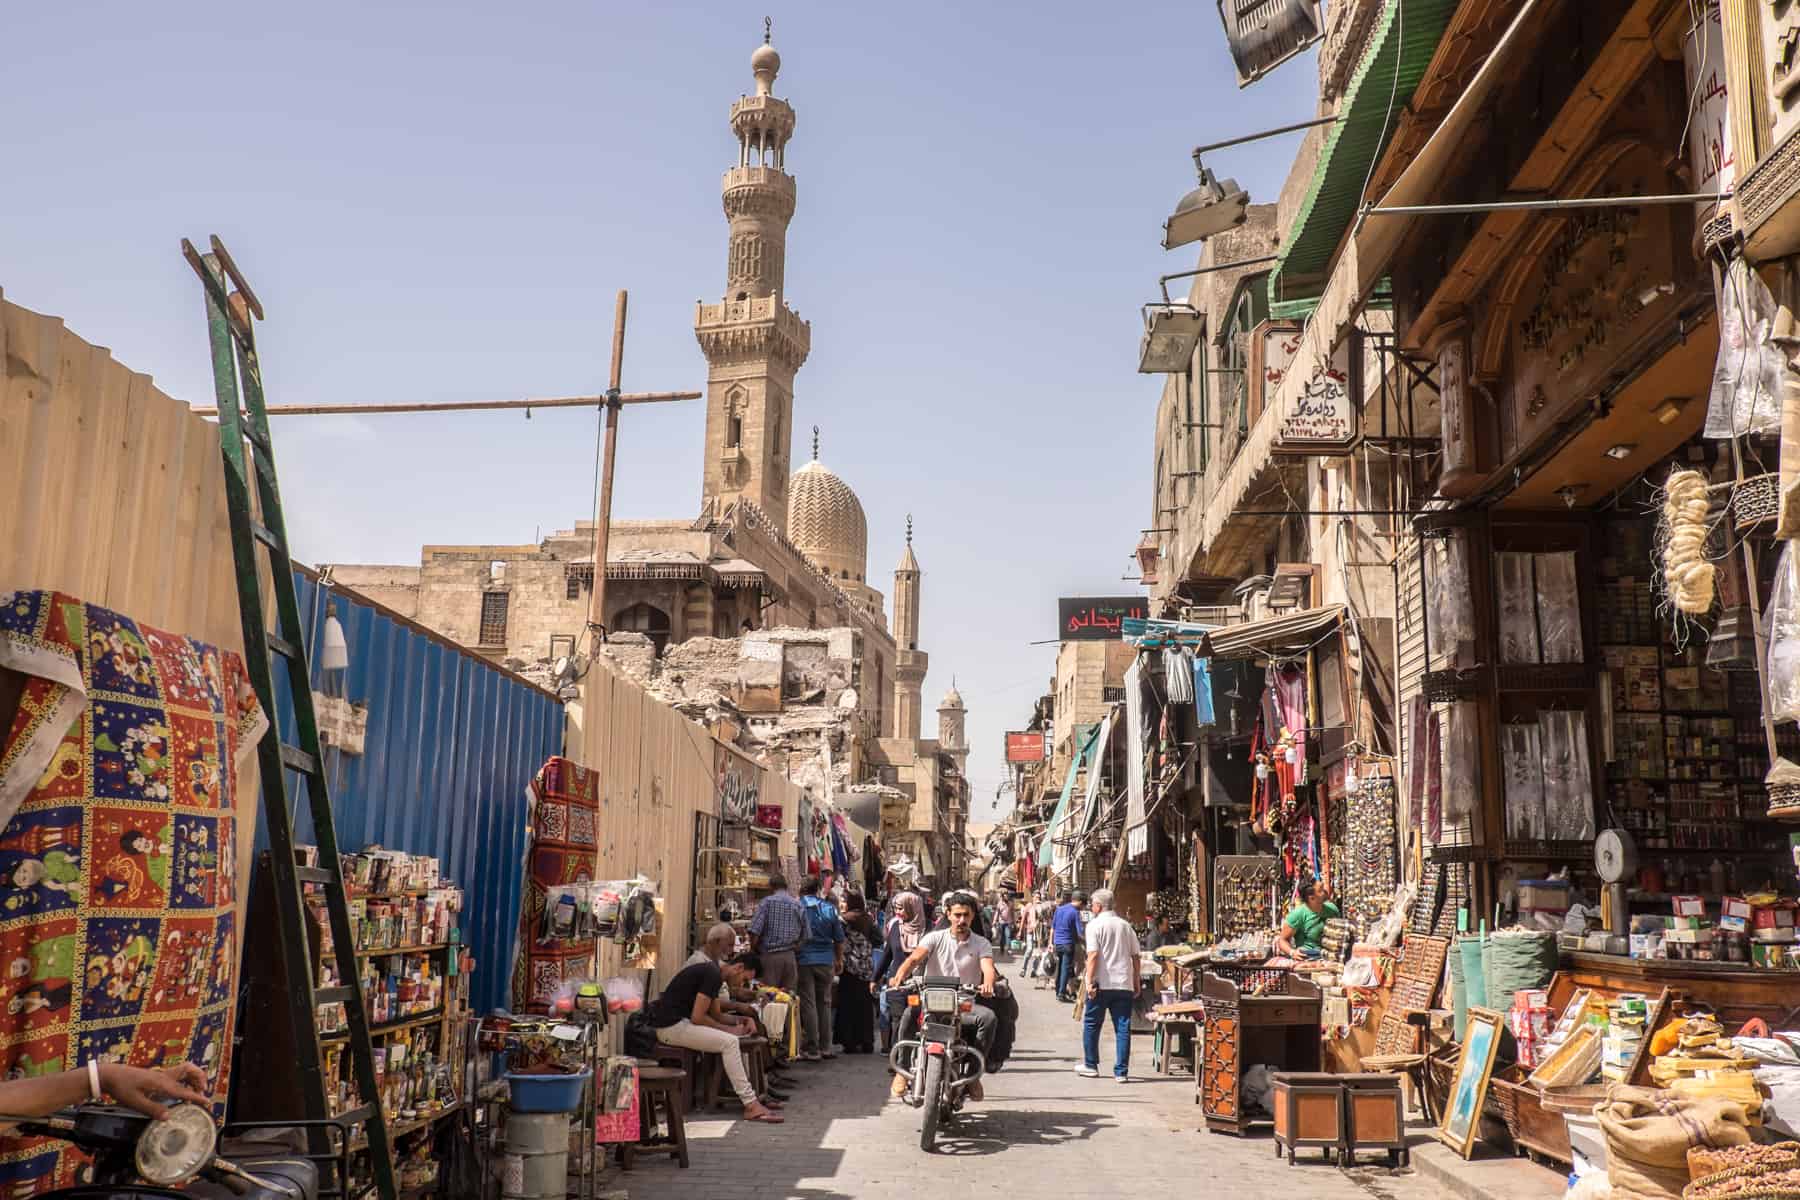 The dusty, crowded narrow streets full of trinket stalls and people of the Khan El Khalili Bazaar in Cairo Egypt